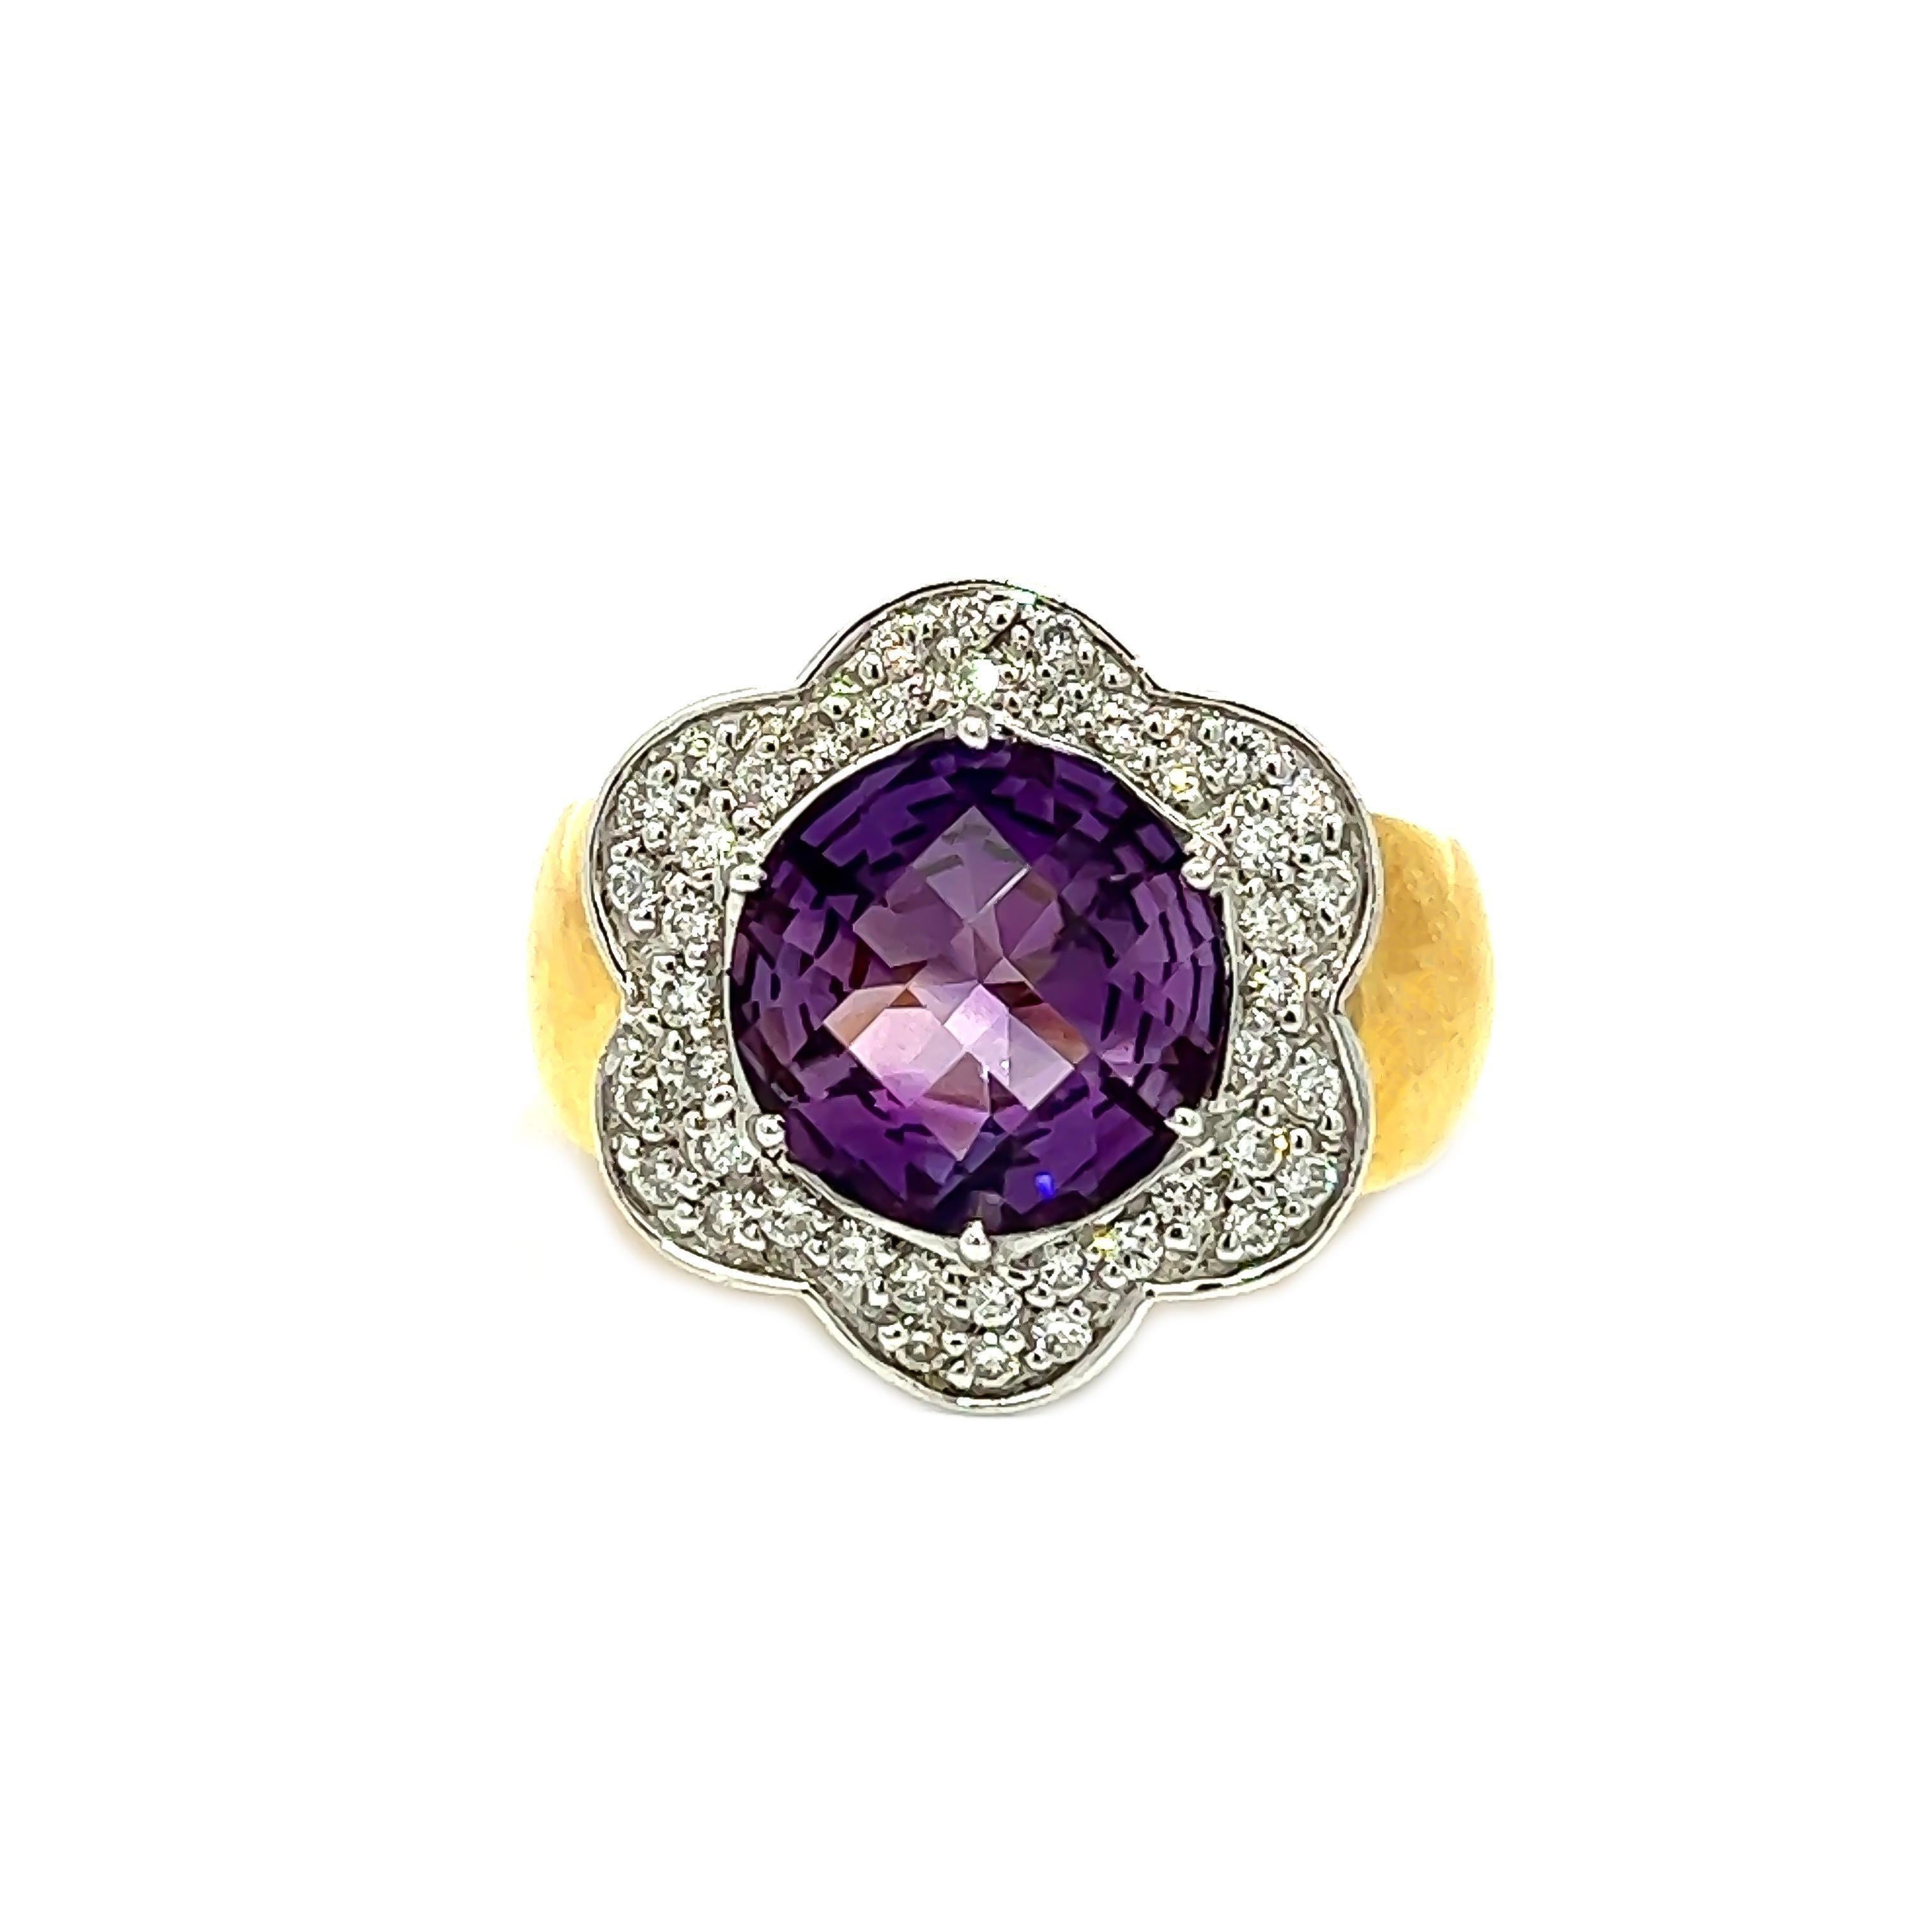 This exquisite flower ring is an absolute must-have for those with an eye for creativity and artistry. The ring boasts a gorgeous 3.36ct Amethyst stone, elegantly encircled by 0.43ct of diamond petals. The ring's 18k yellow and white gold setting